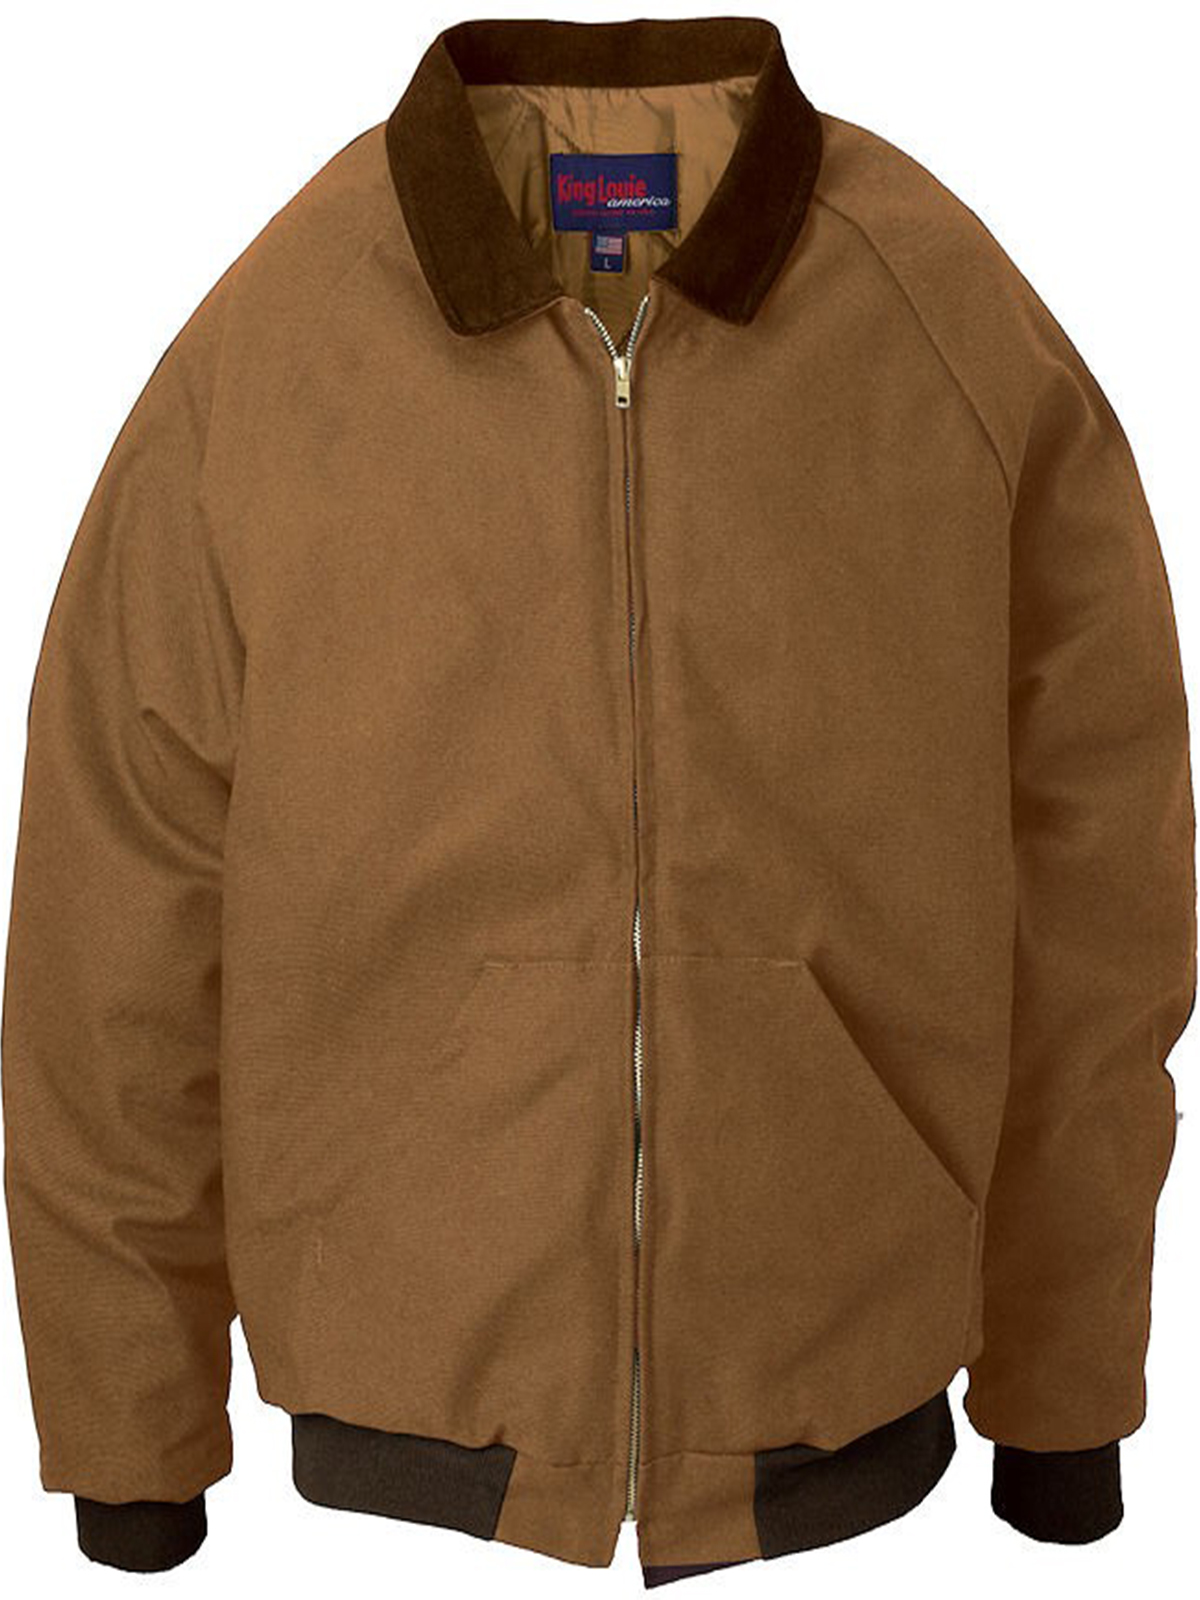 King Louie Canyon Full Fit Duck Jacket